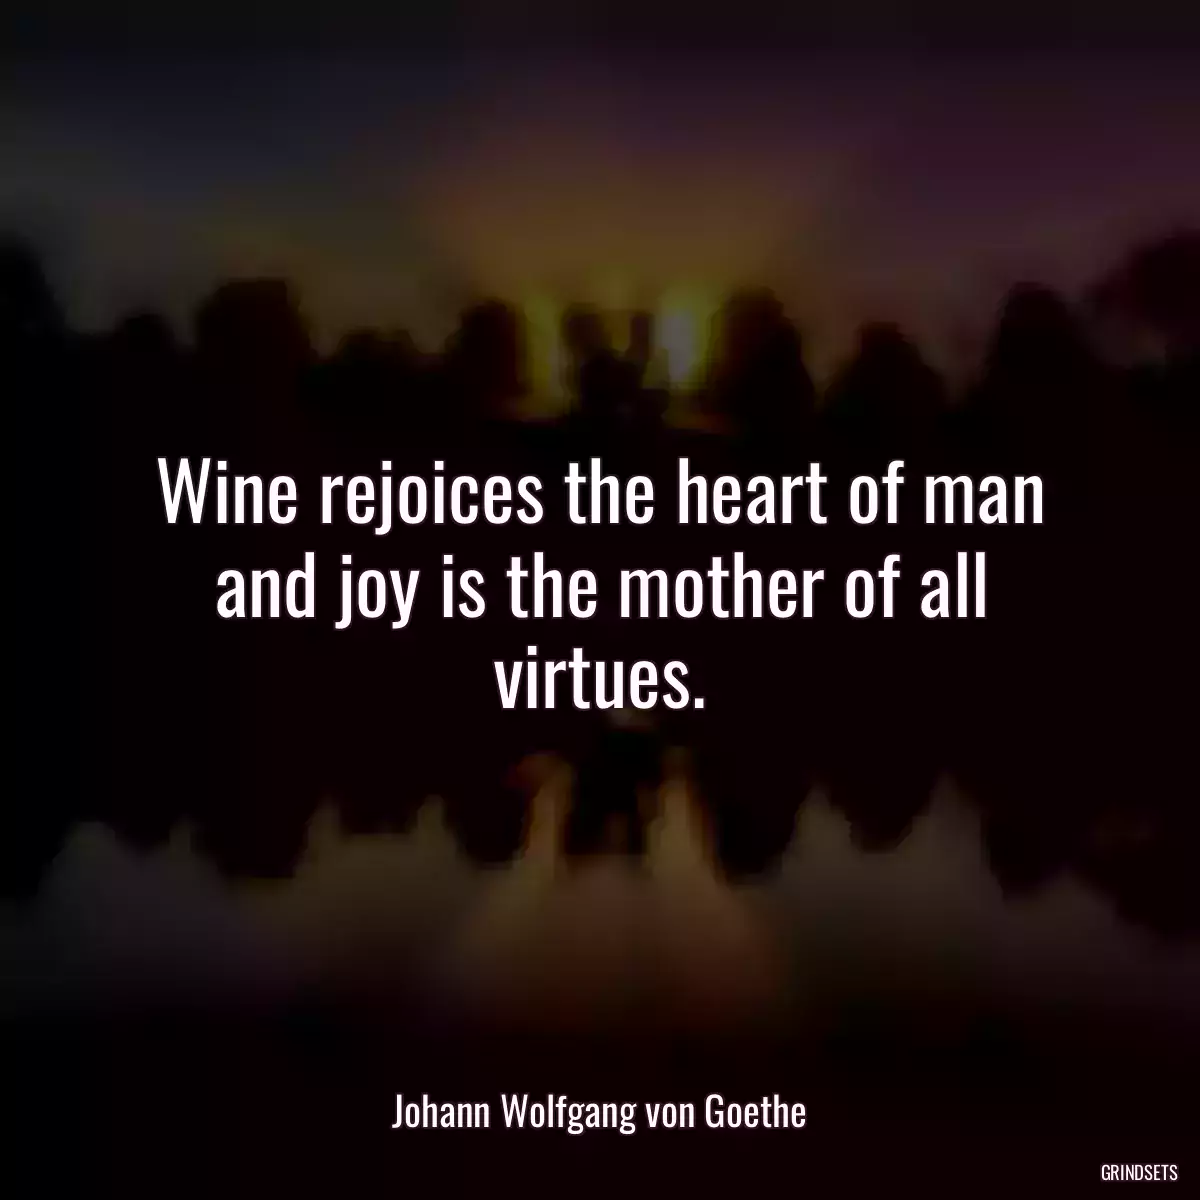 Wine rejoices the heart of man and joy is the mother of all virtues.